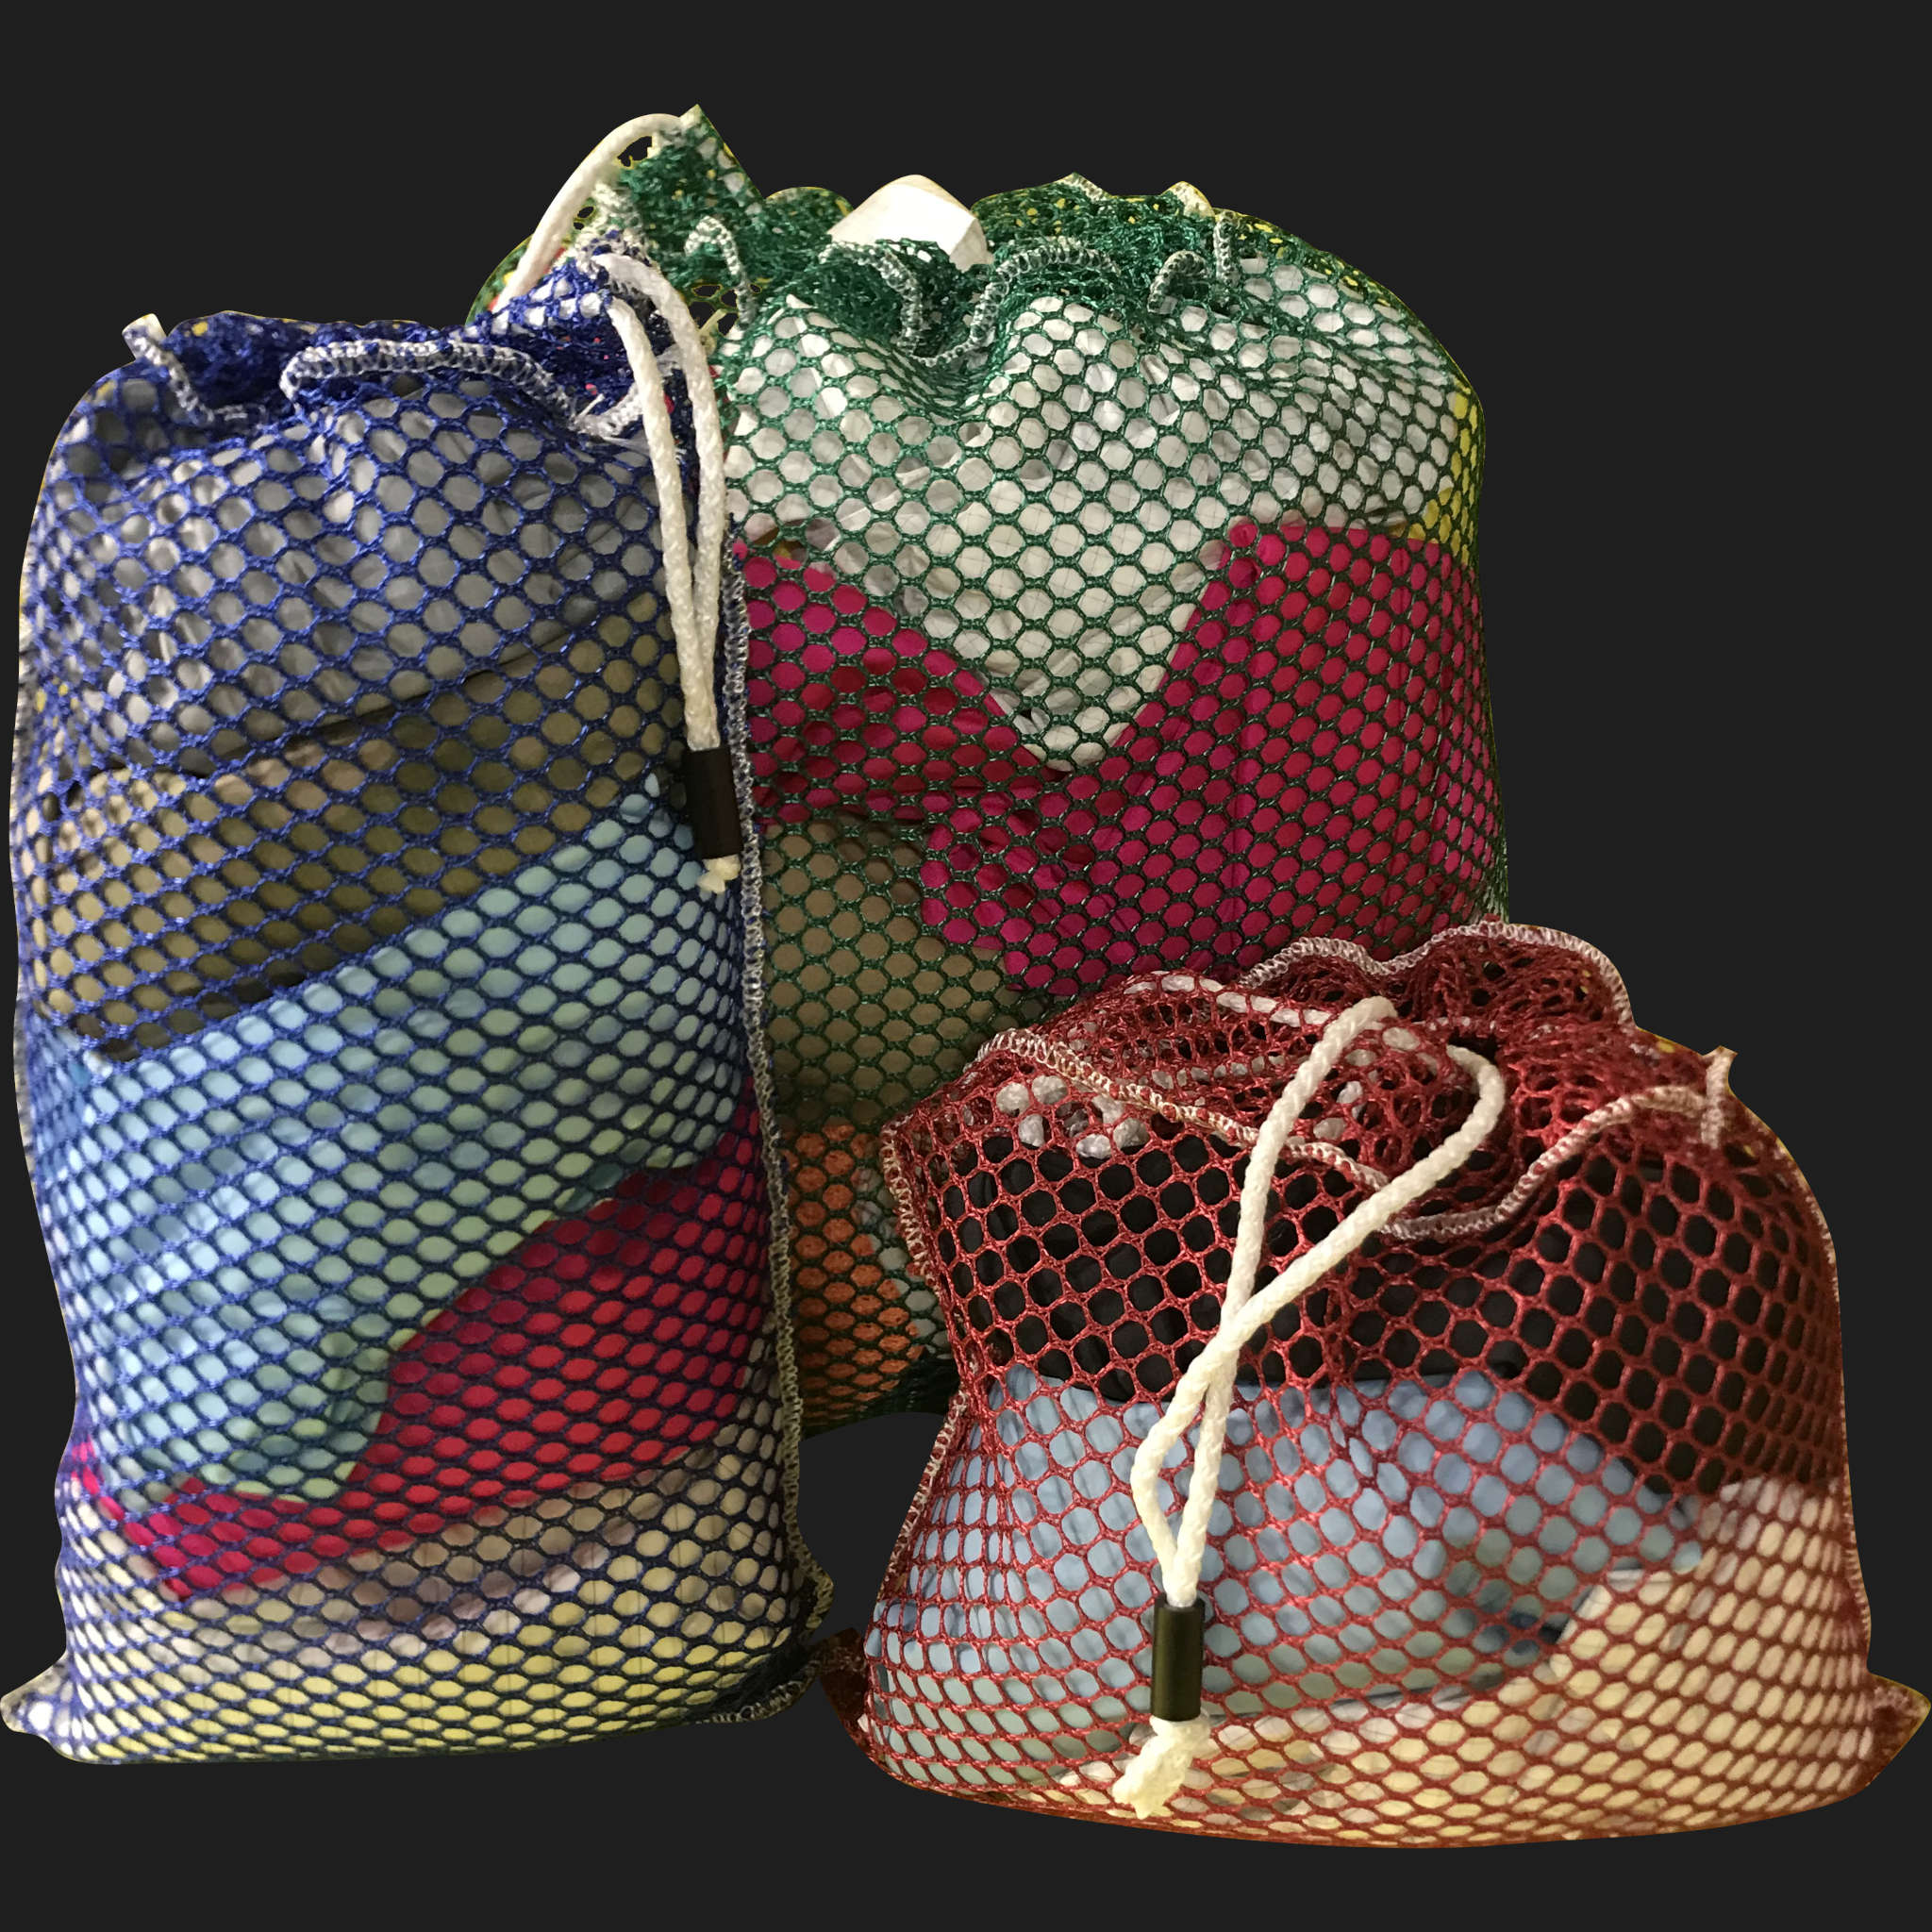 22" x 50" Customized Mesh-Net-Laundry Bags Heavy Duty with Cord and barrellock closure